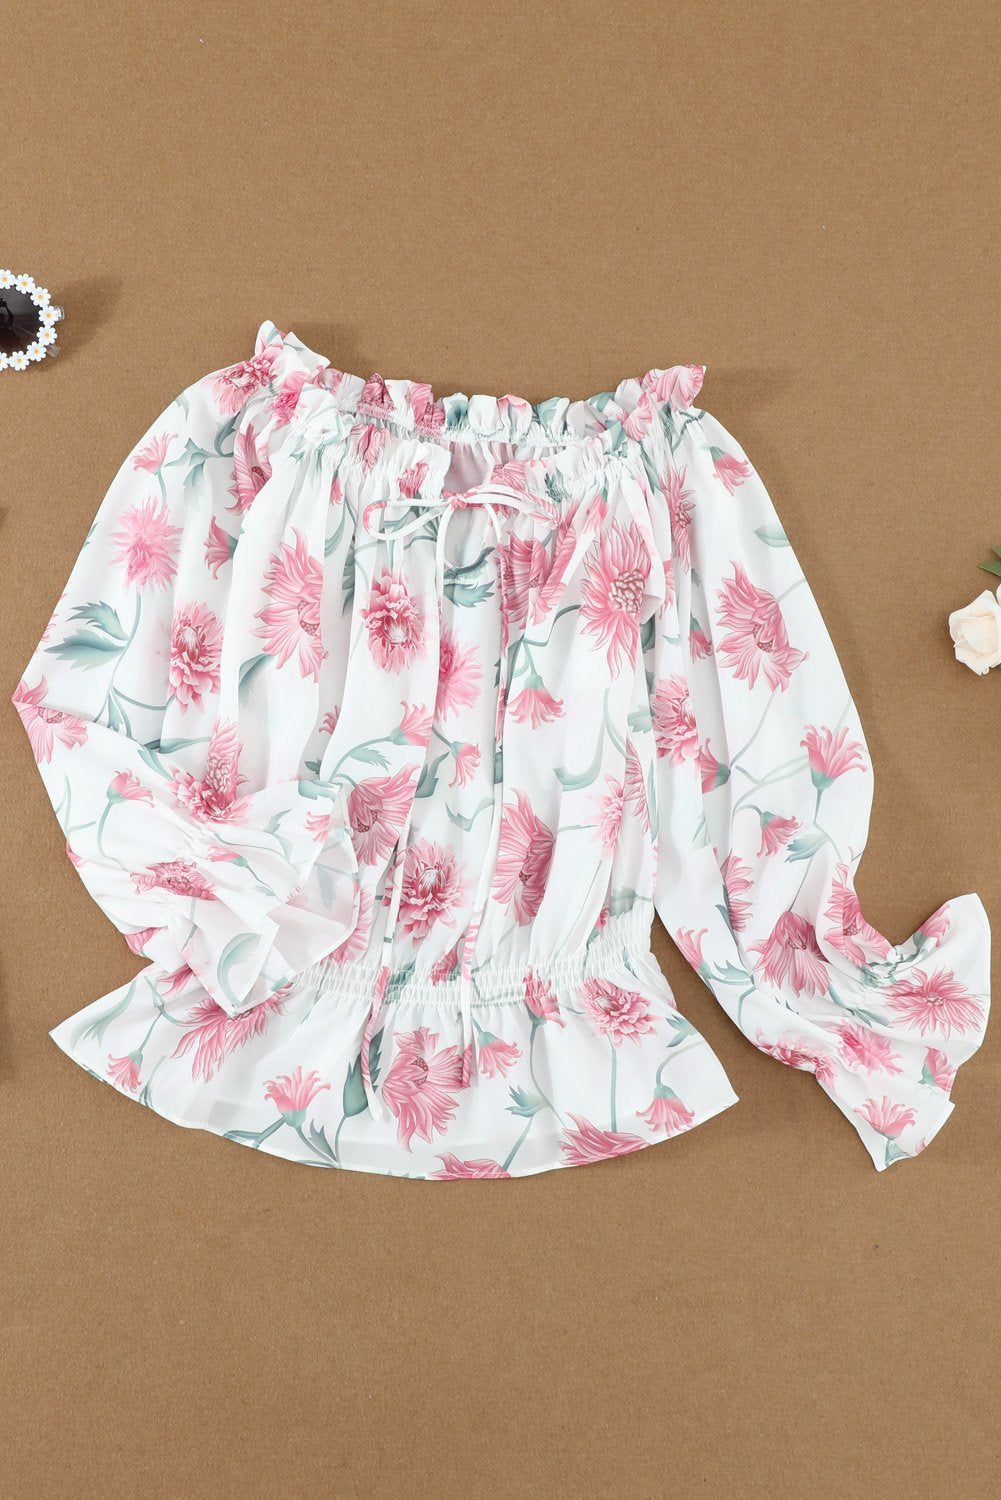 Chic White Pink Floral Print Off the Shoulder Blouse